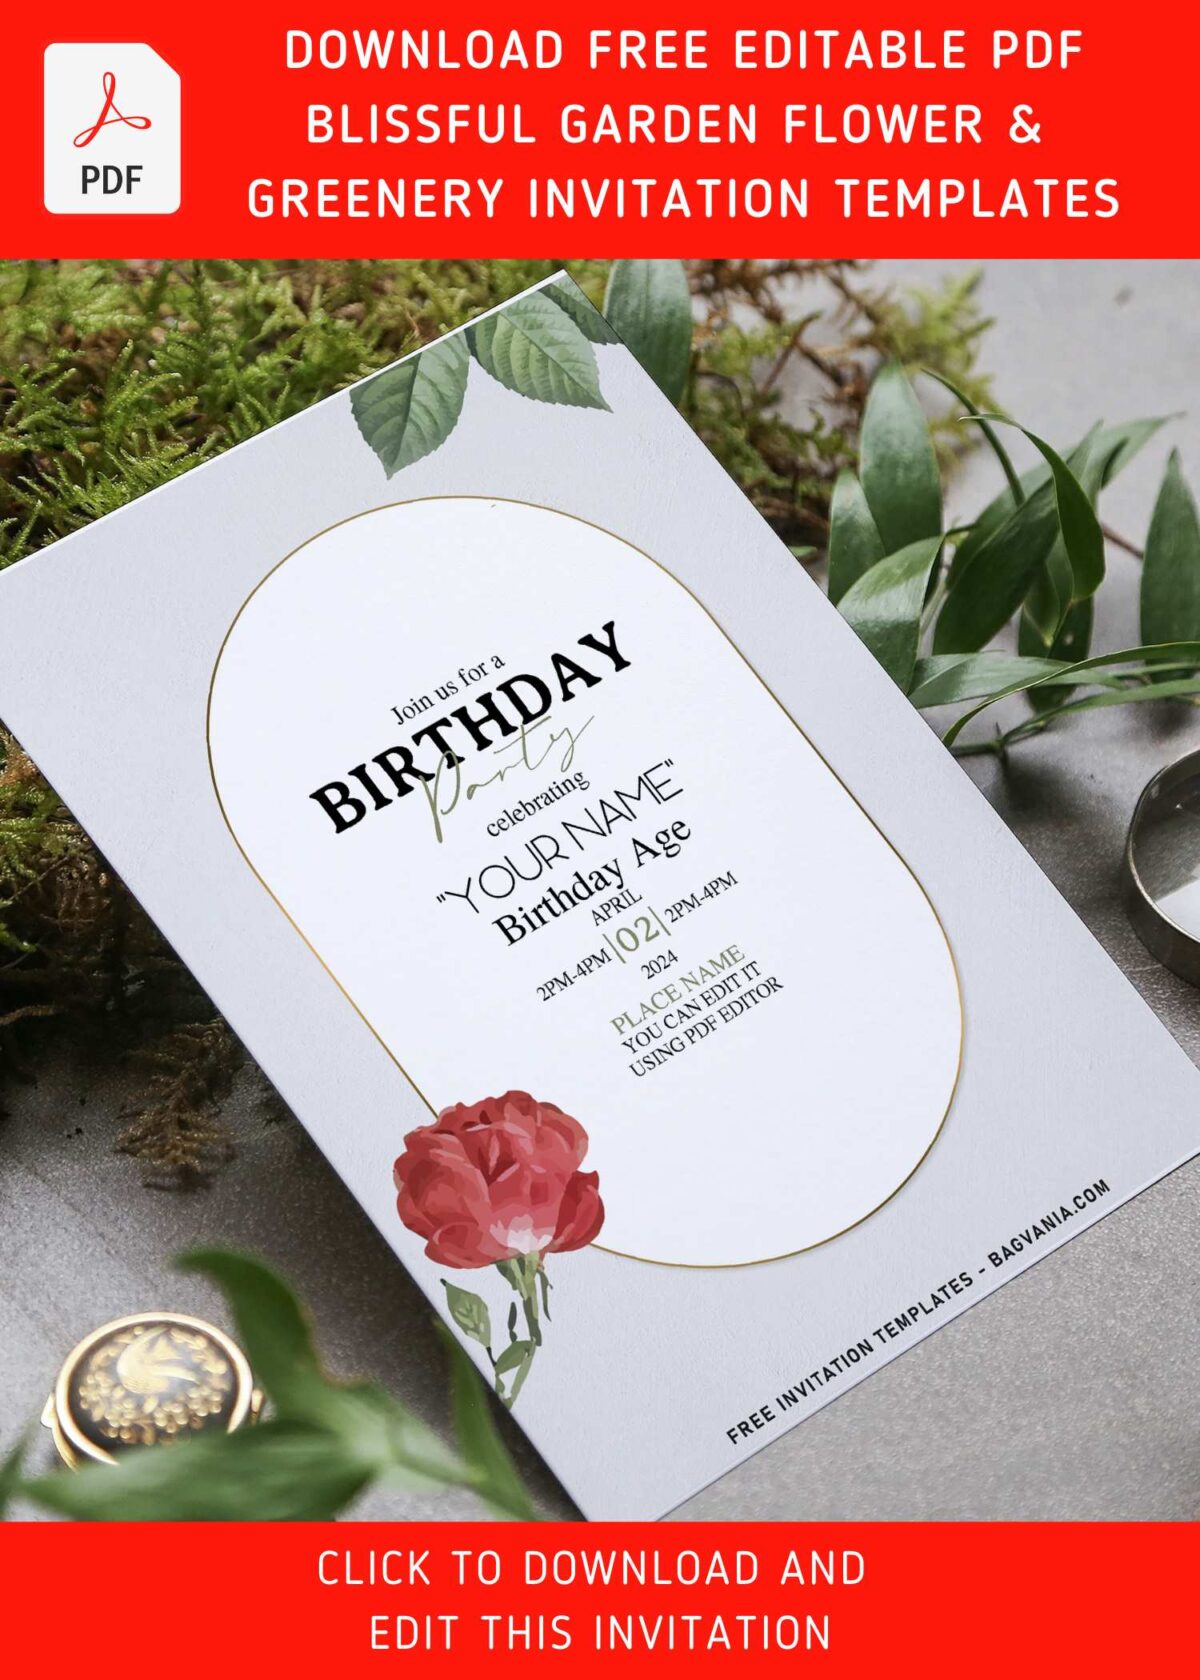 (Free Editable PDF) Blissful Garden Flower And Greenery Invitation Templates with green ash